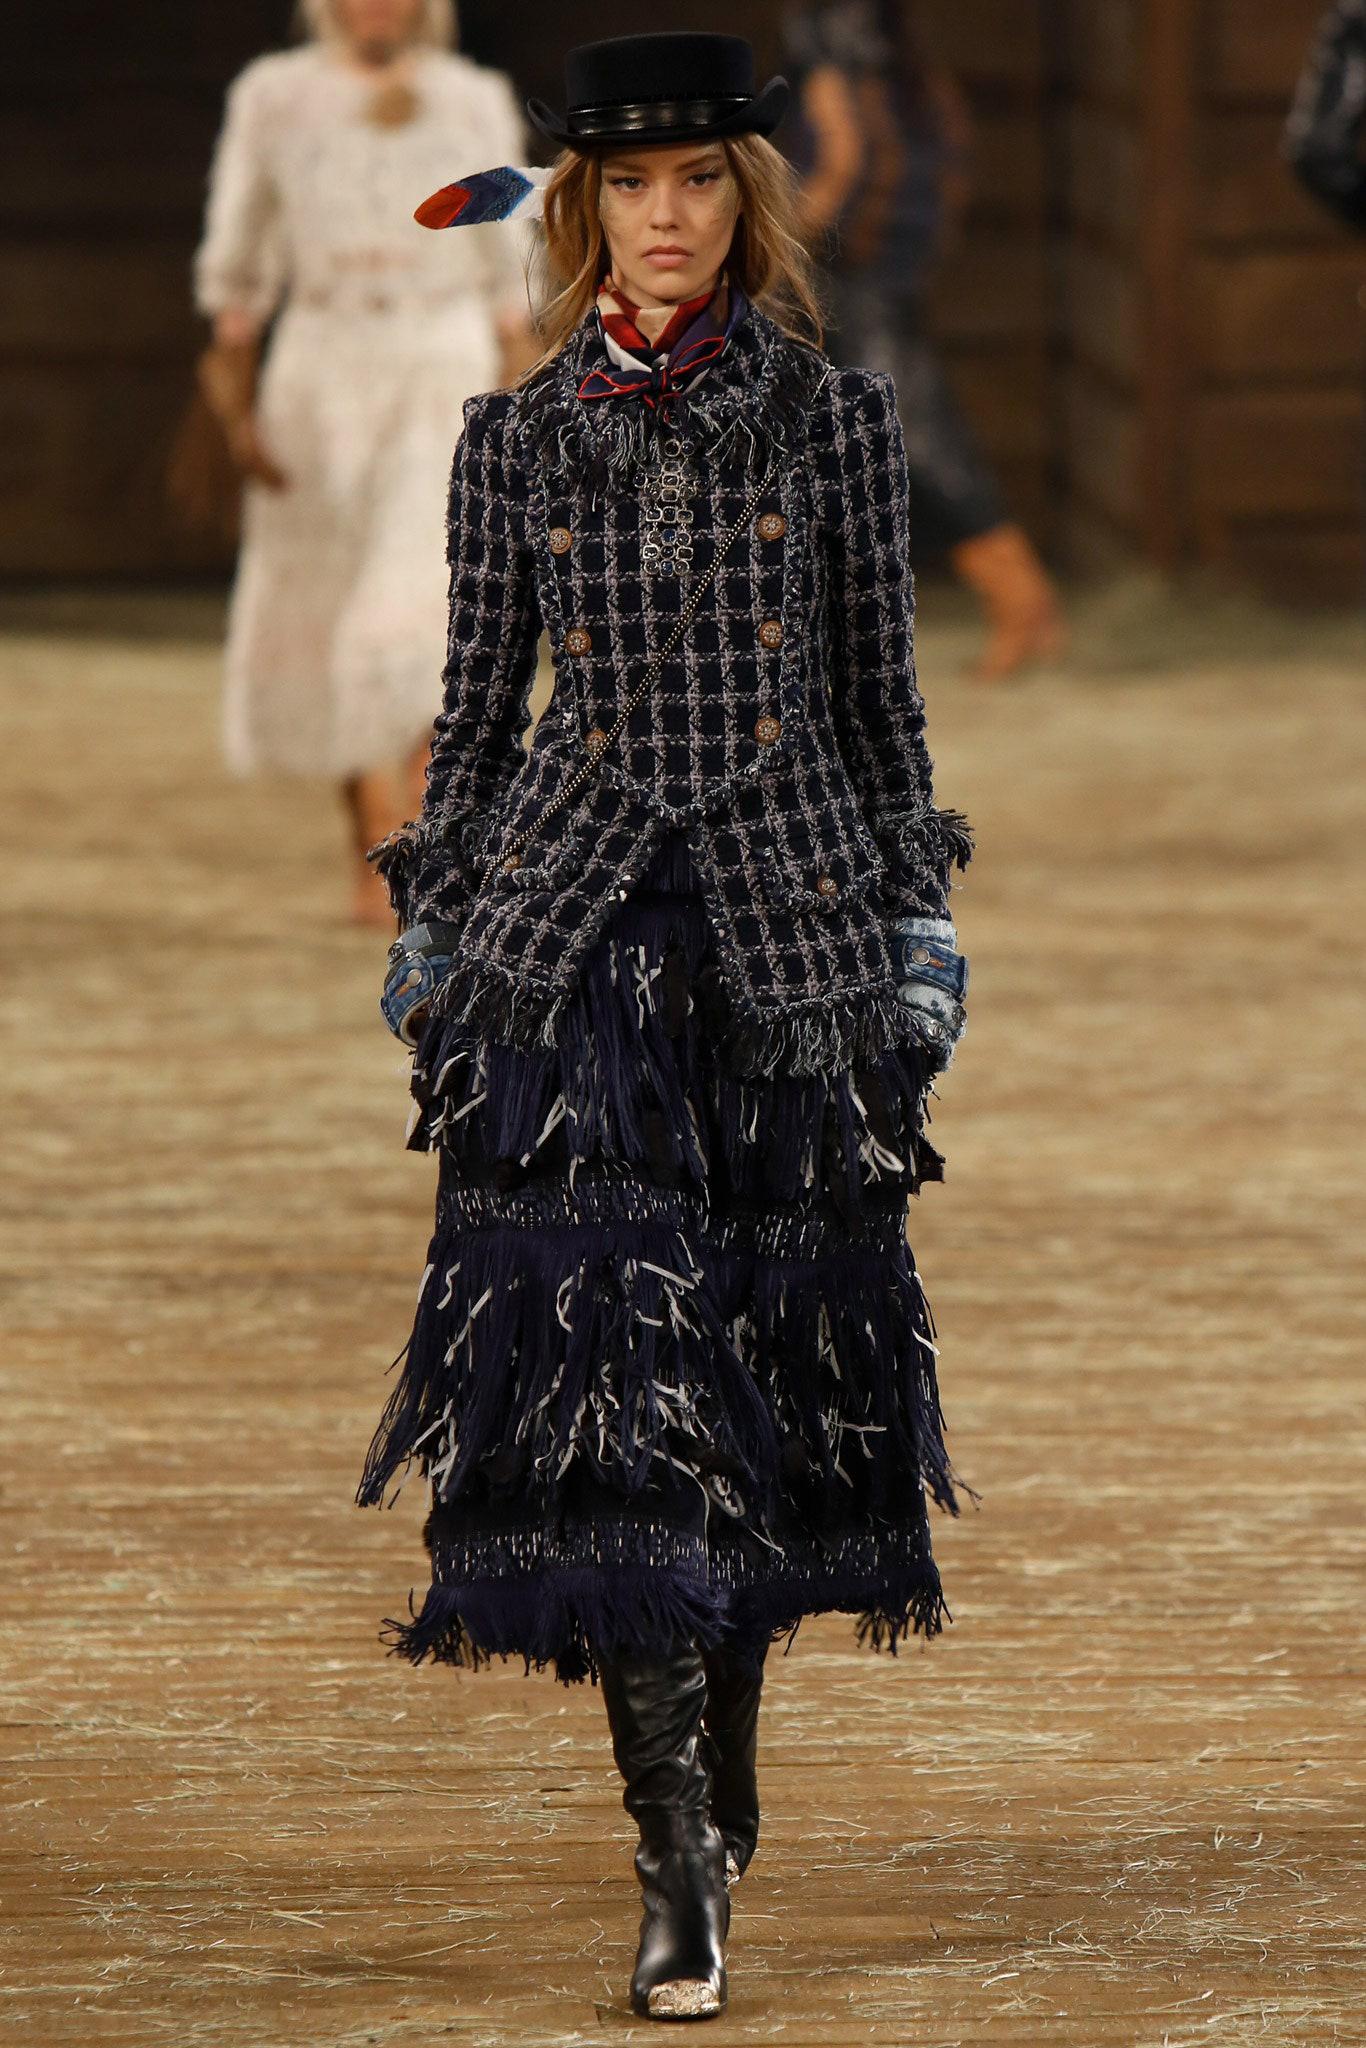 New hard to get, collectors Chanel navy tweed jacket with fringe detail from Runway of Paris / DALLAS Collection, 2014 Pre-Fall Metiers d'Art
Size mark 40 fr. Never worn! Retail price over 10,000$
Price on e-bay 6,999$ for a pre-owned item.
- CC zip